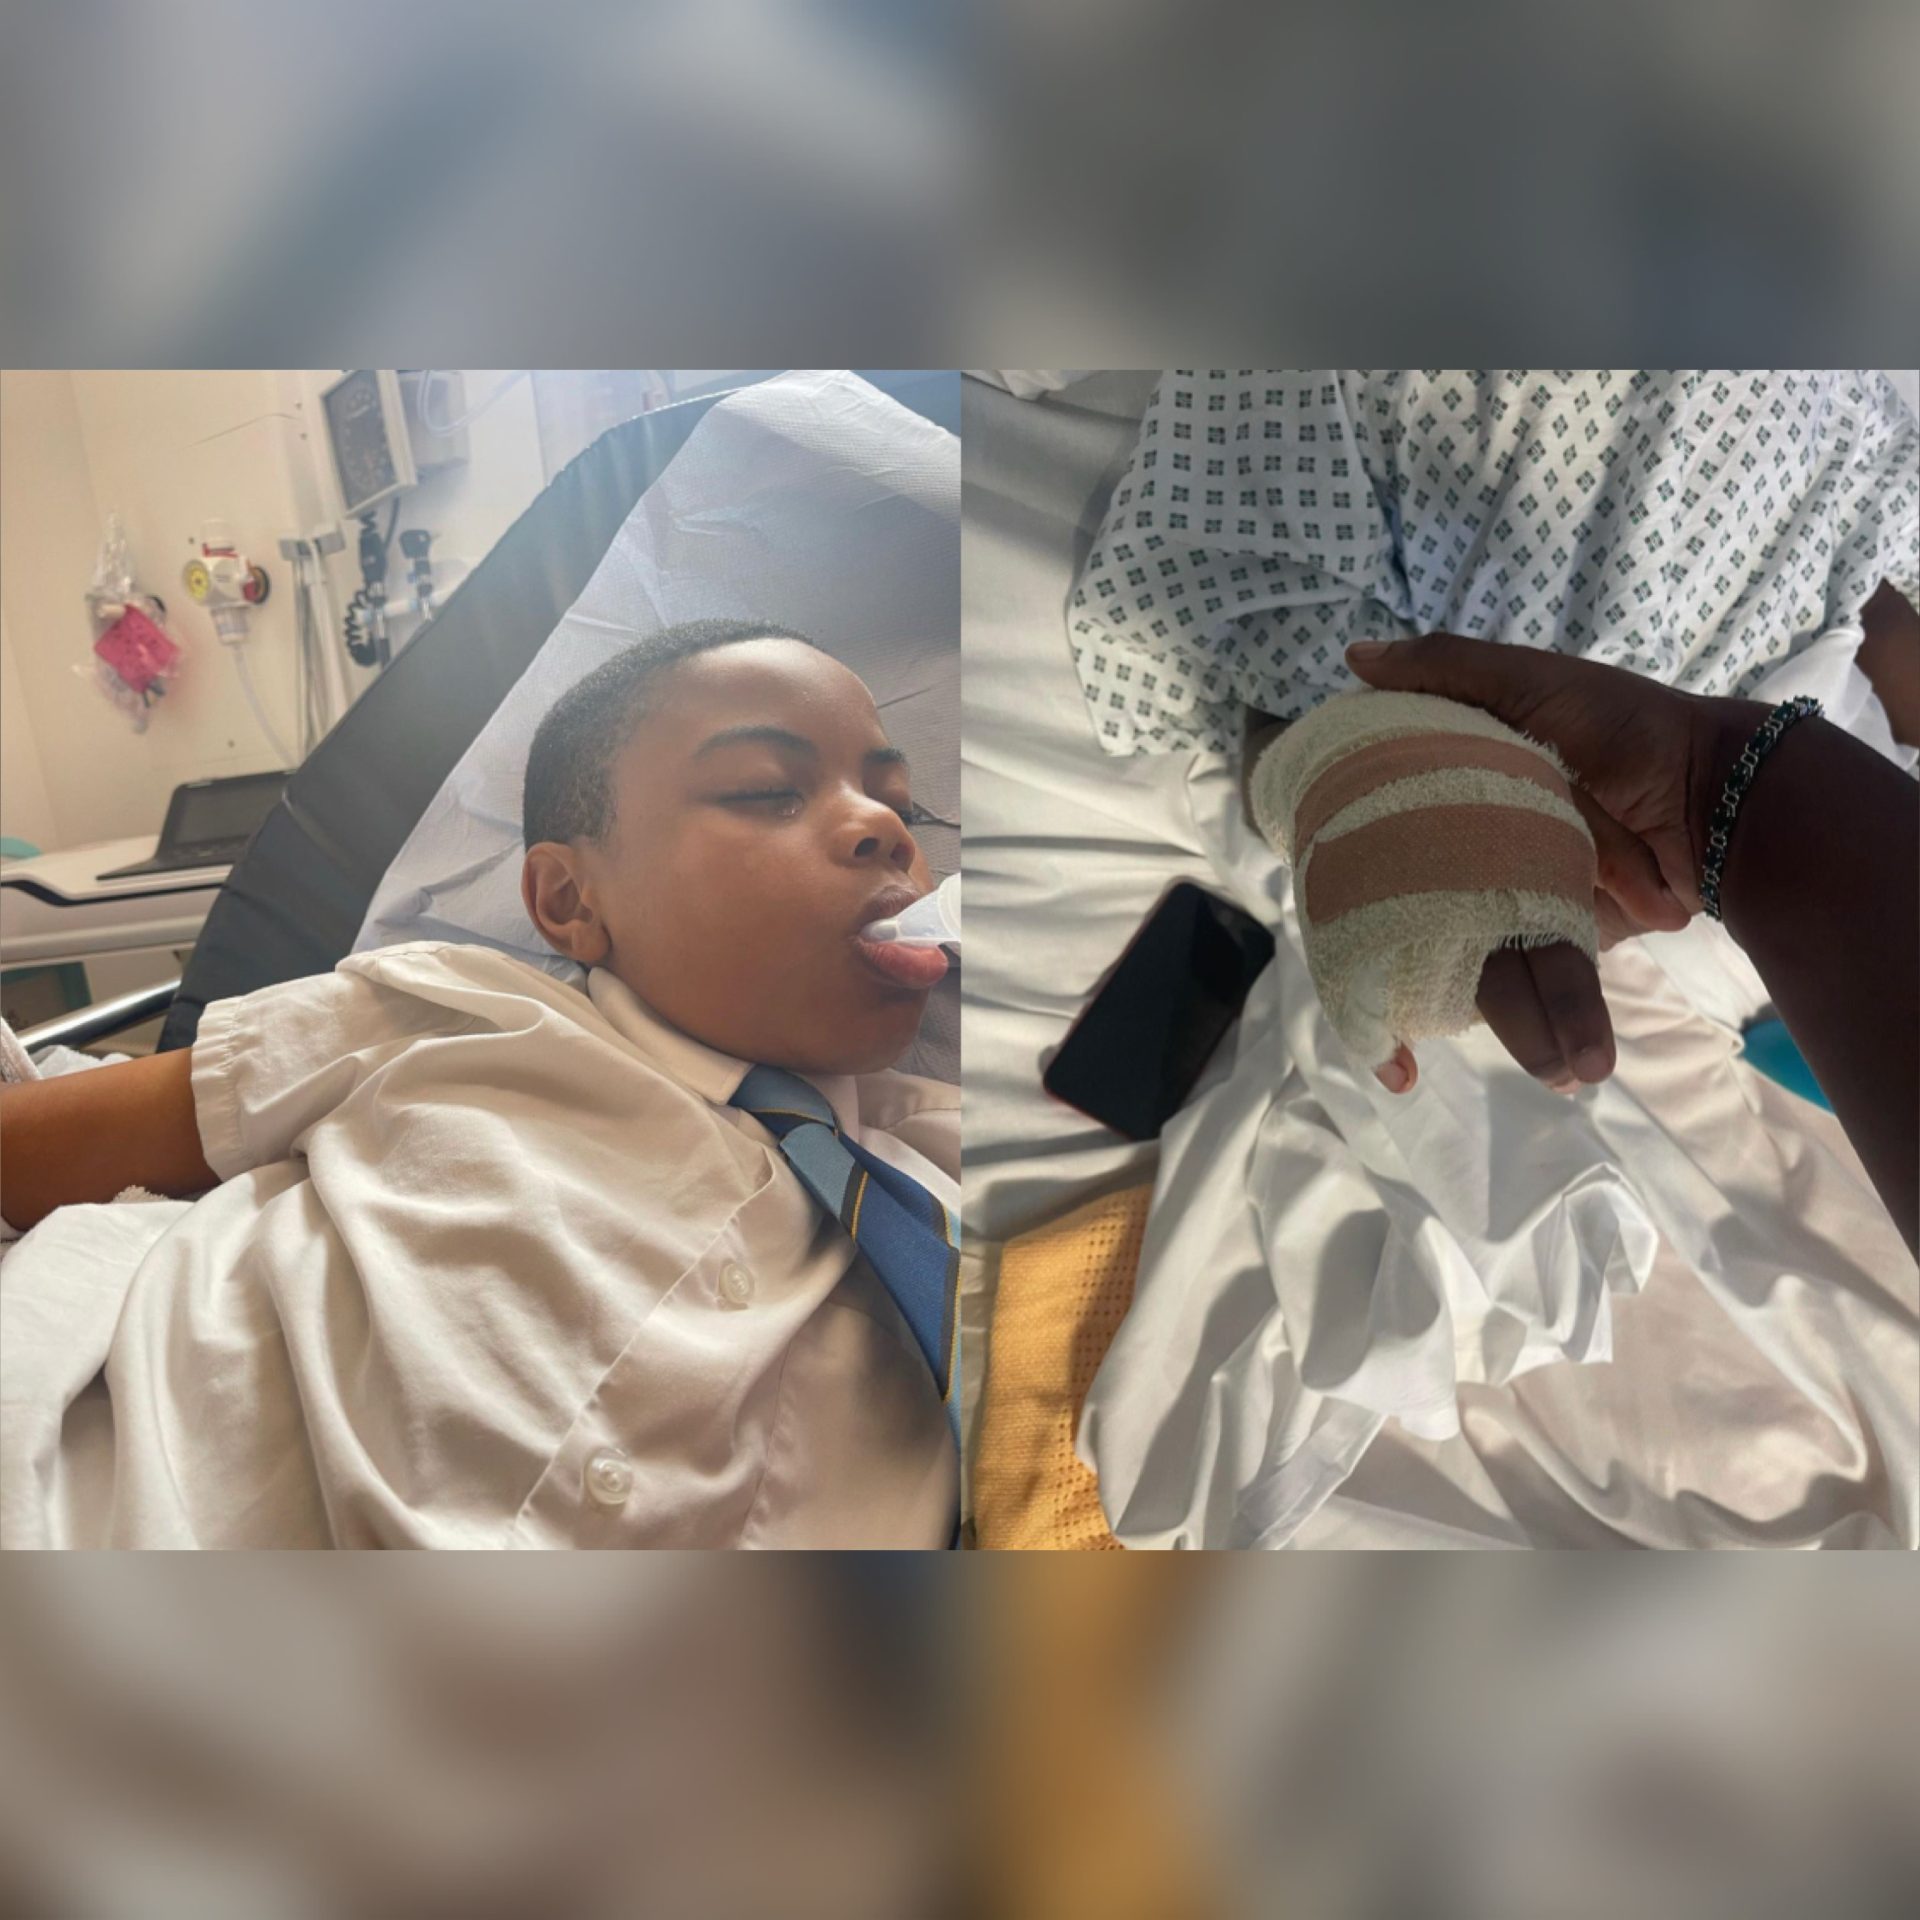 Young Boy Forced To Amputate Finger After Fleeing From Racist School Bullies